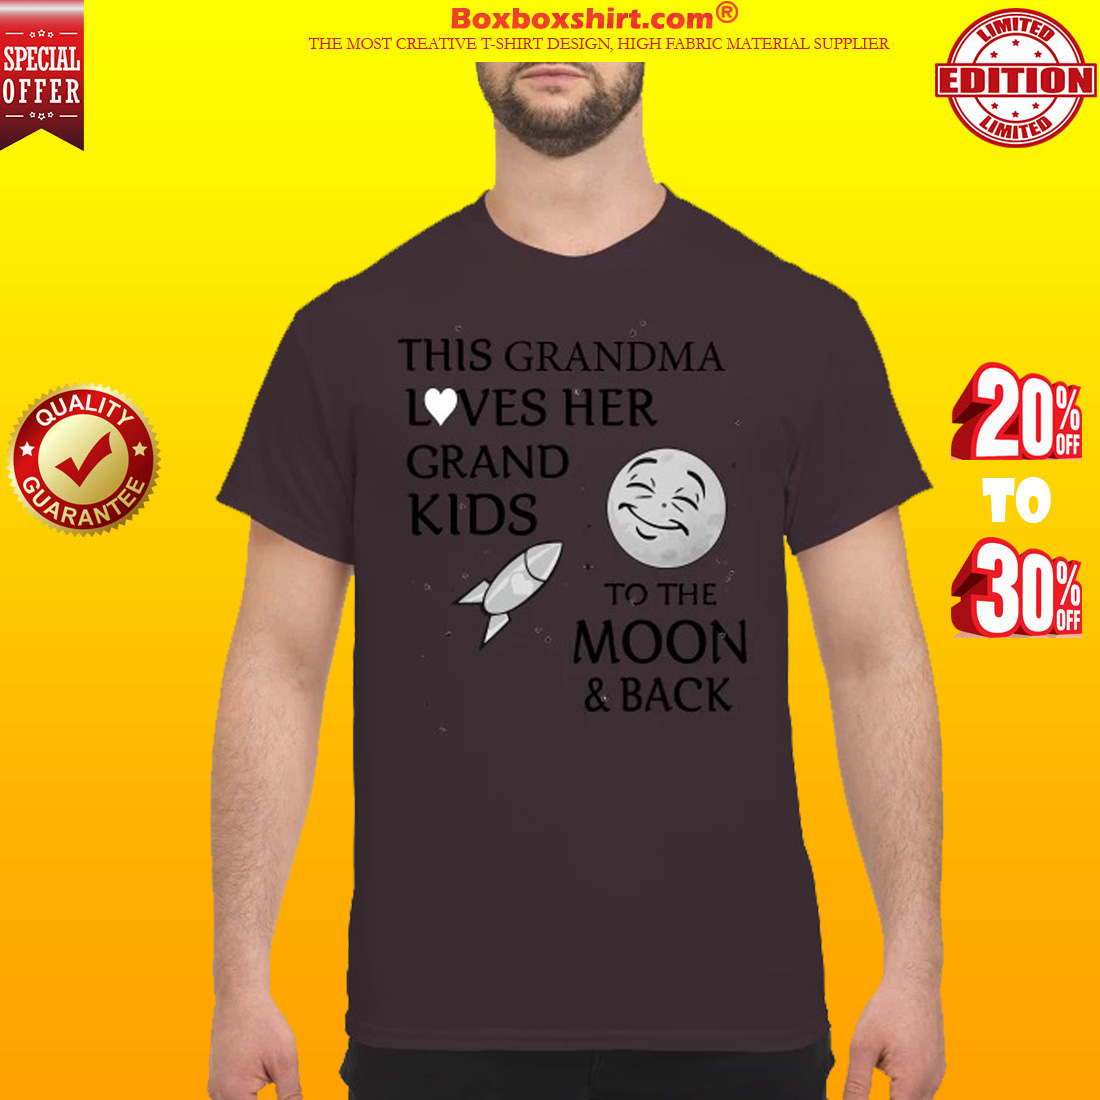 This grandma loves her grand kids to the moon and back classic shirt